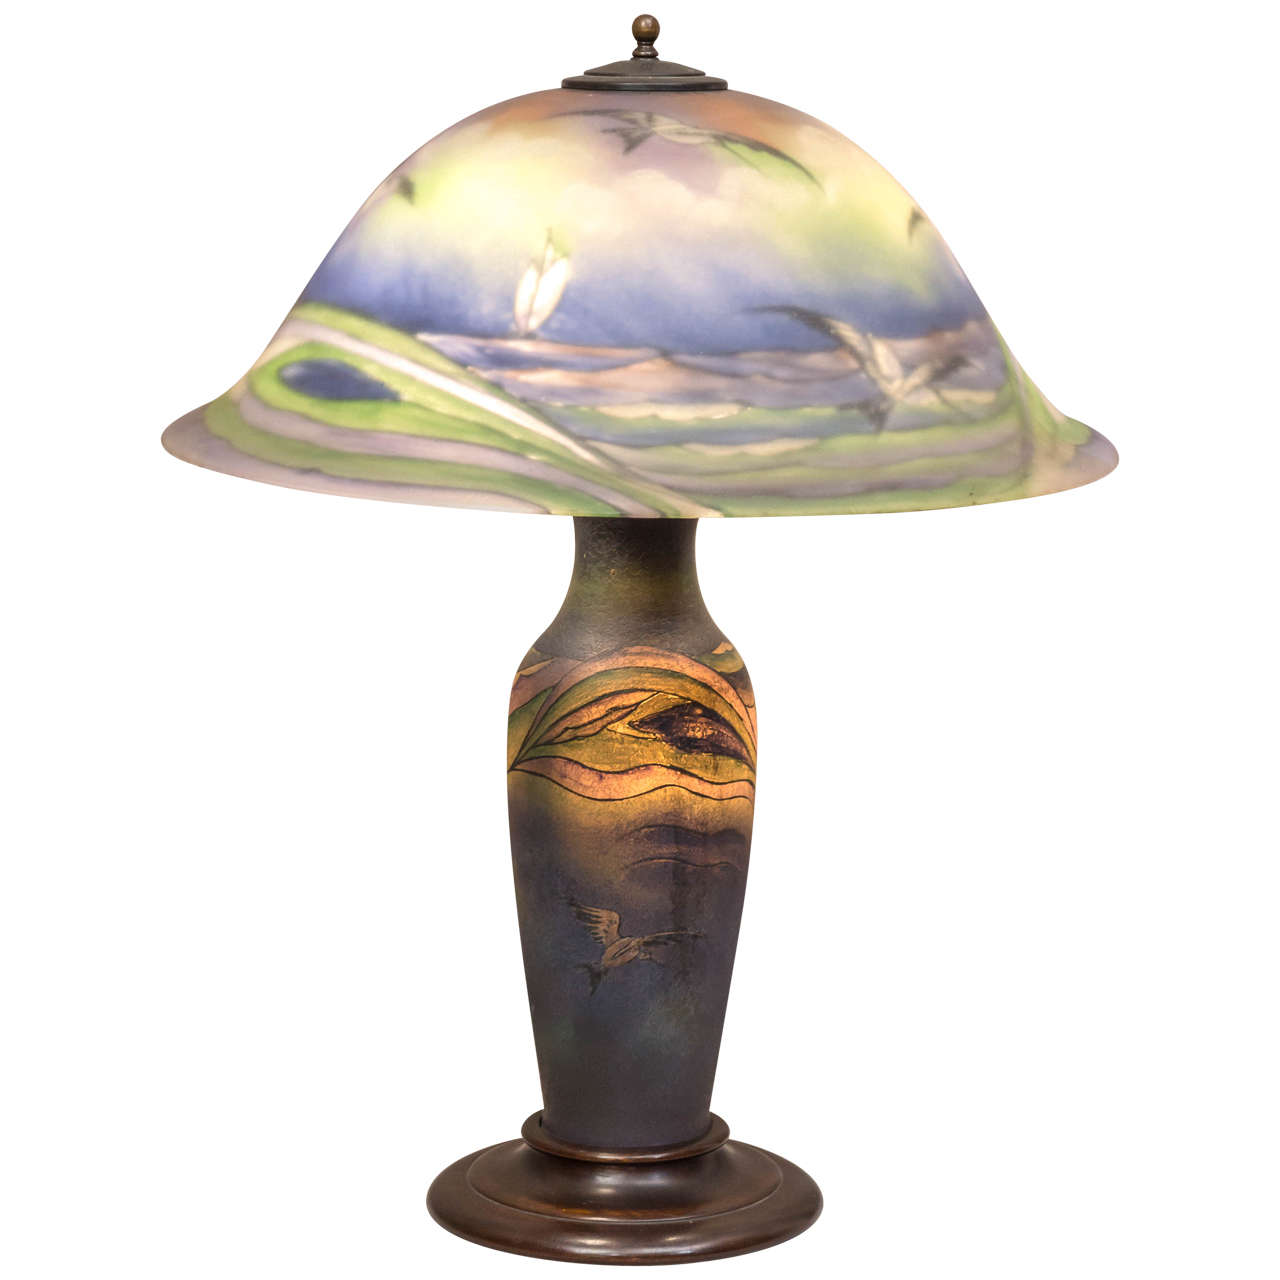 Reverse Painted "Seagull Lamp" by the Pairpoint Corperation